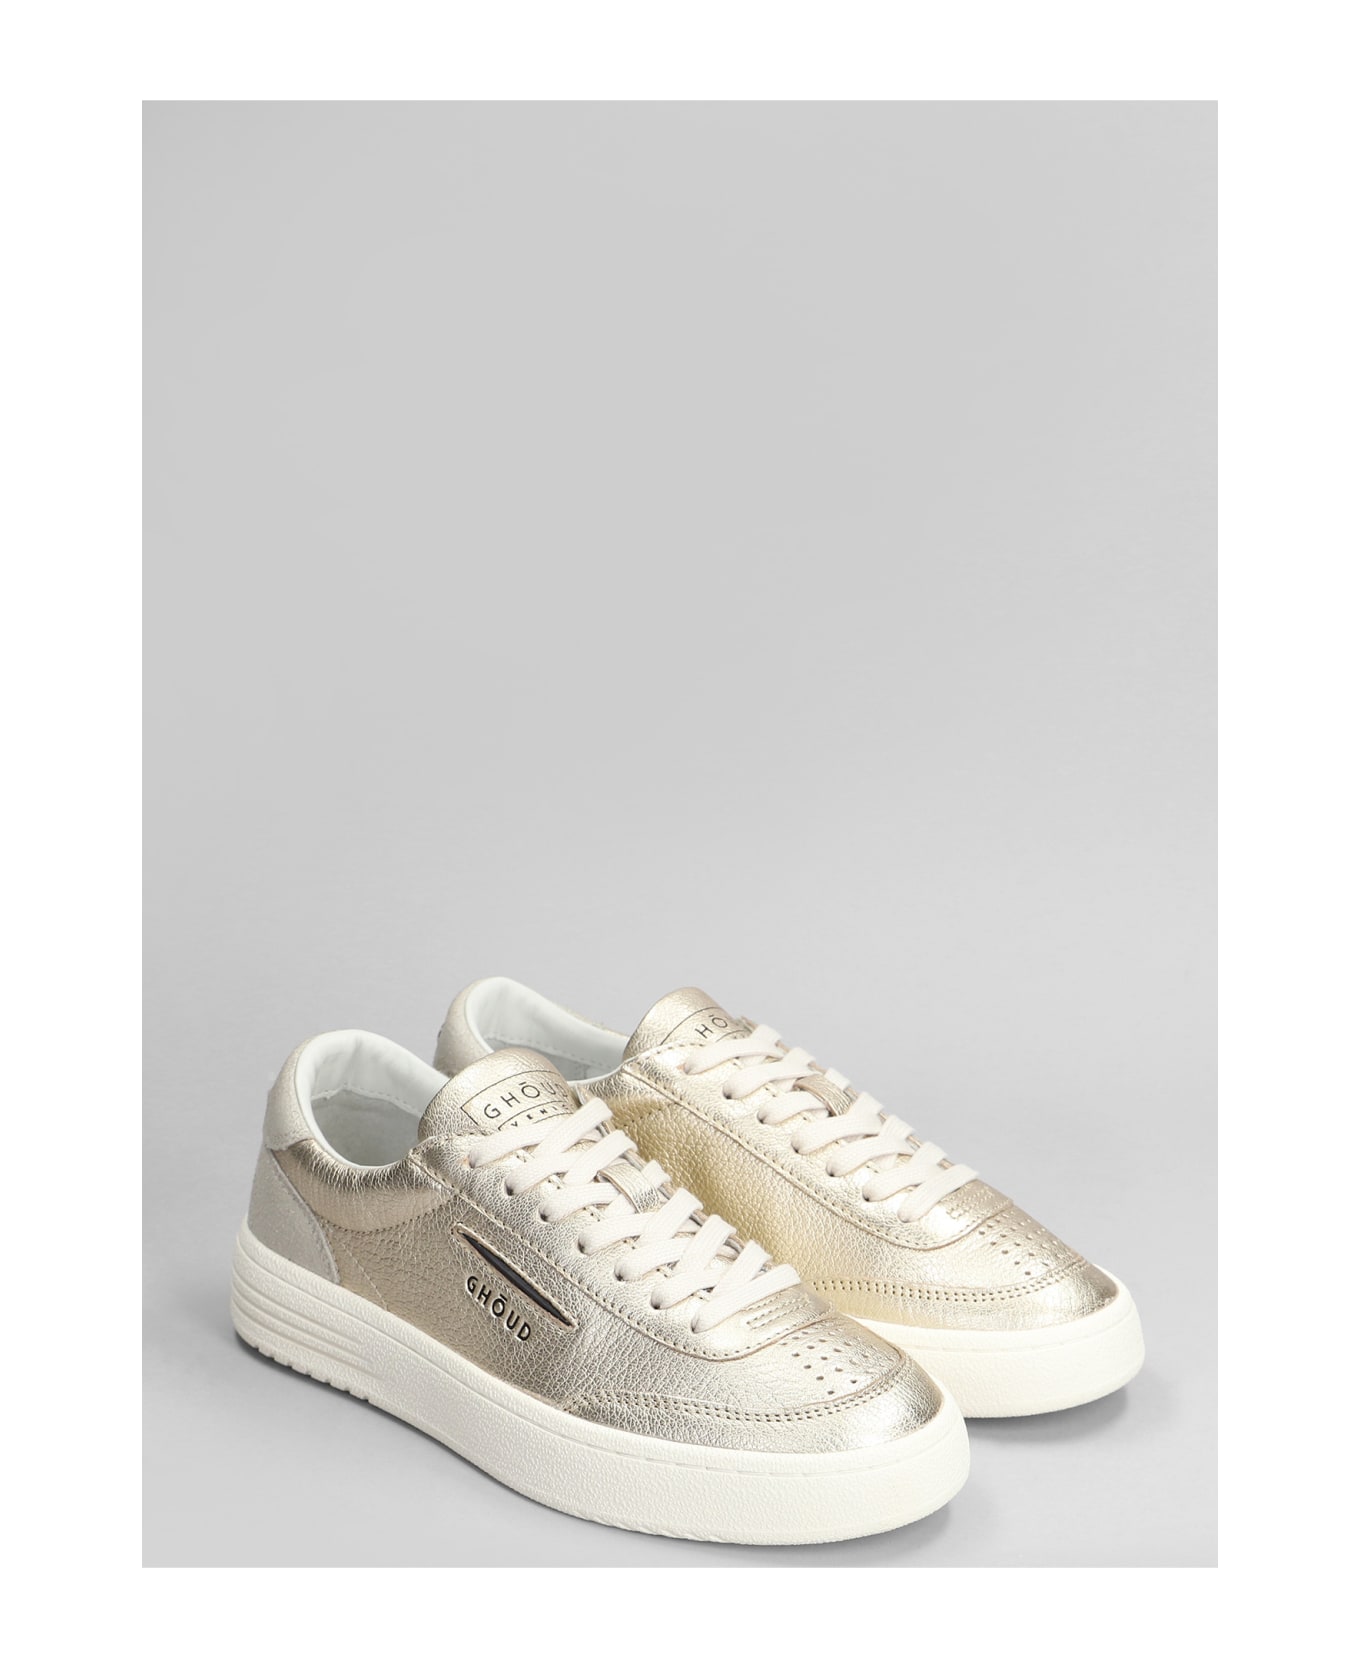 GHOUD Lindo Low Sneakers In Gold Leather - gold スニーカー